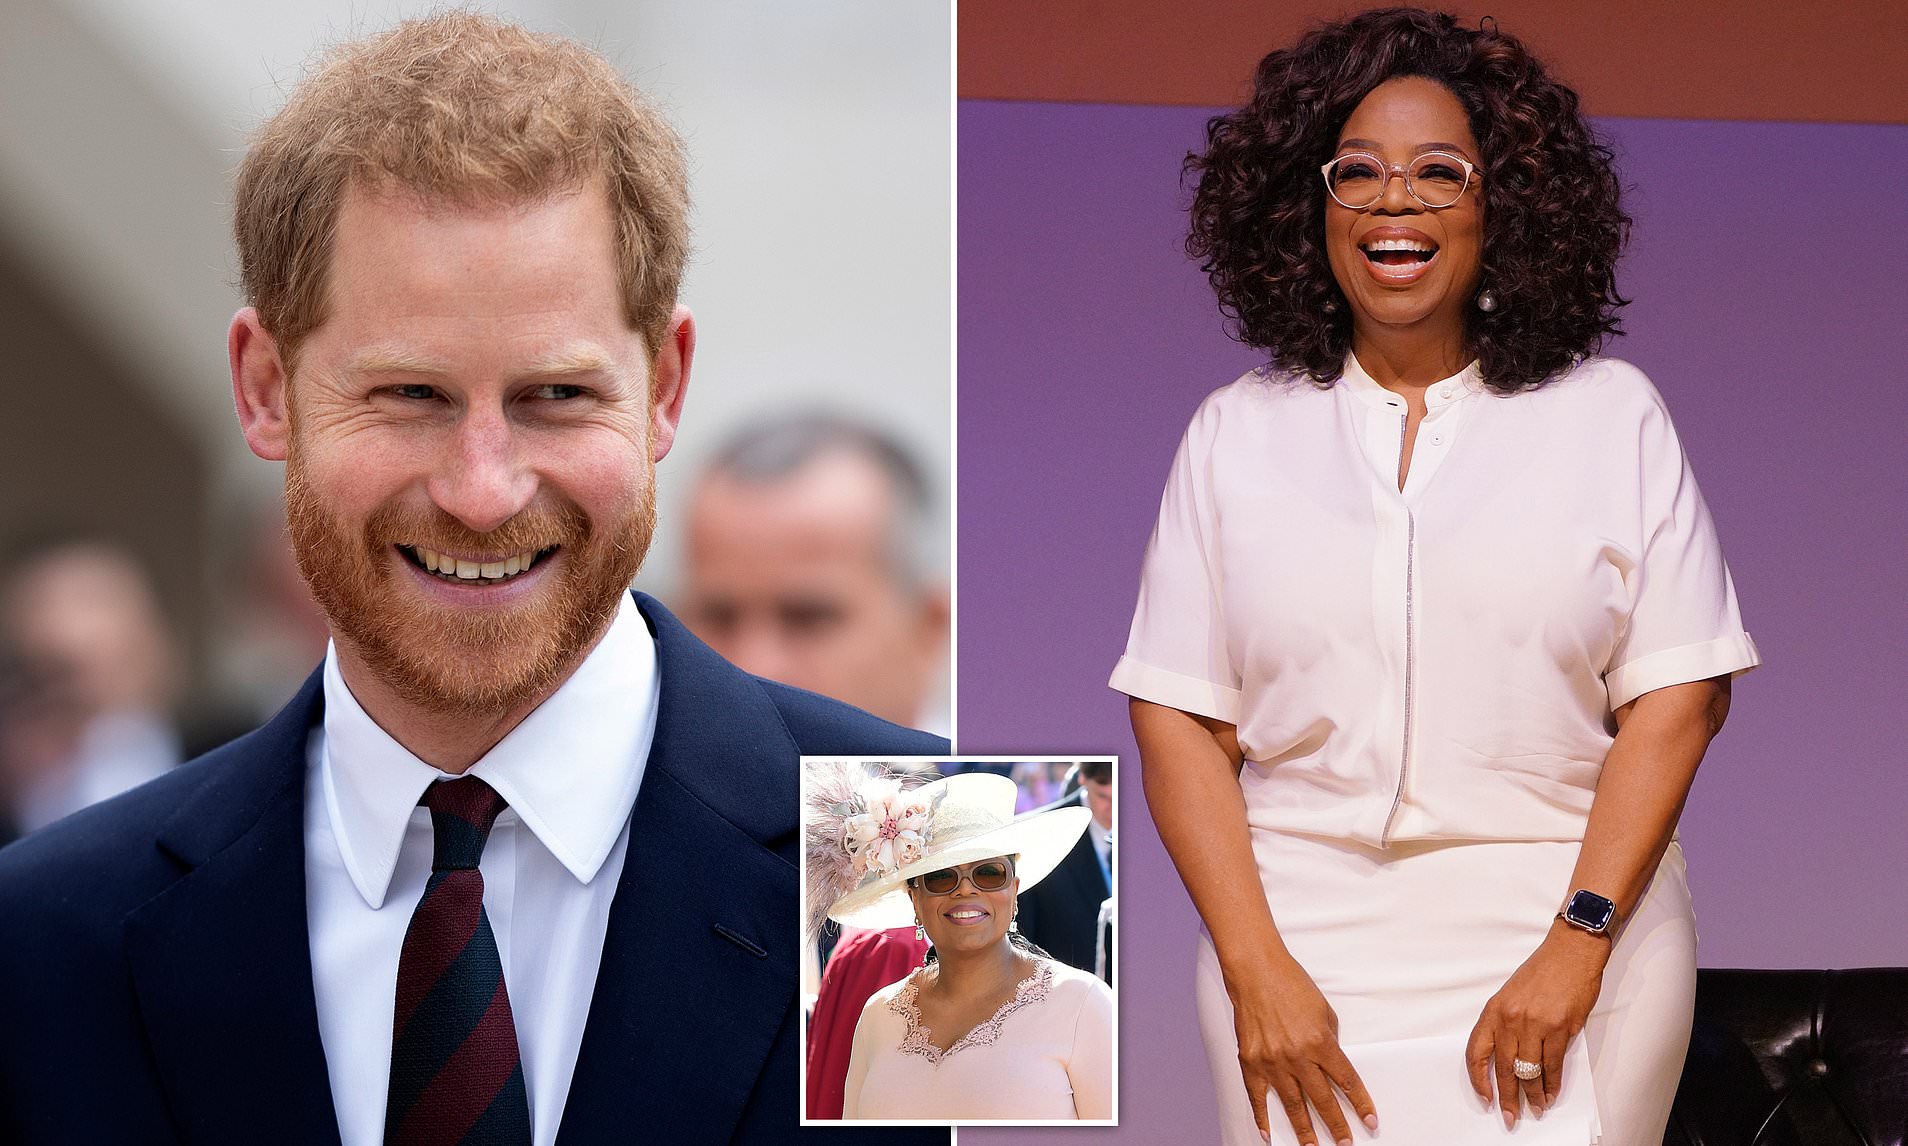 Prince Harry reveals he has partnered with Oprah on an 'enlightening' mental health documentary that the pair has been working on for 'several months' during 'secret meetings in London'